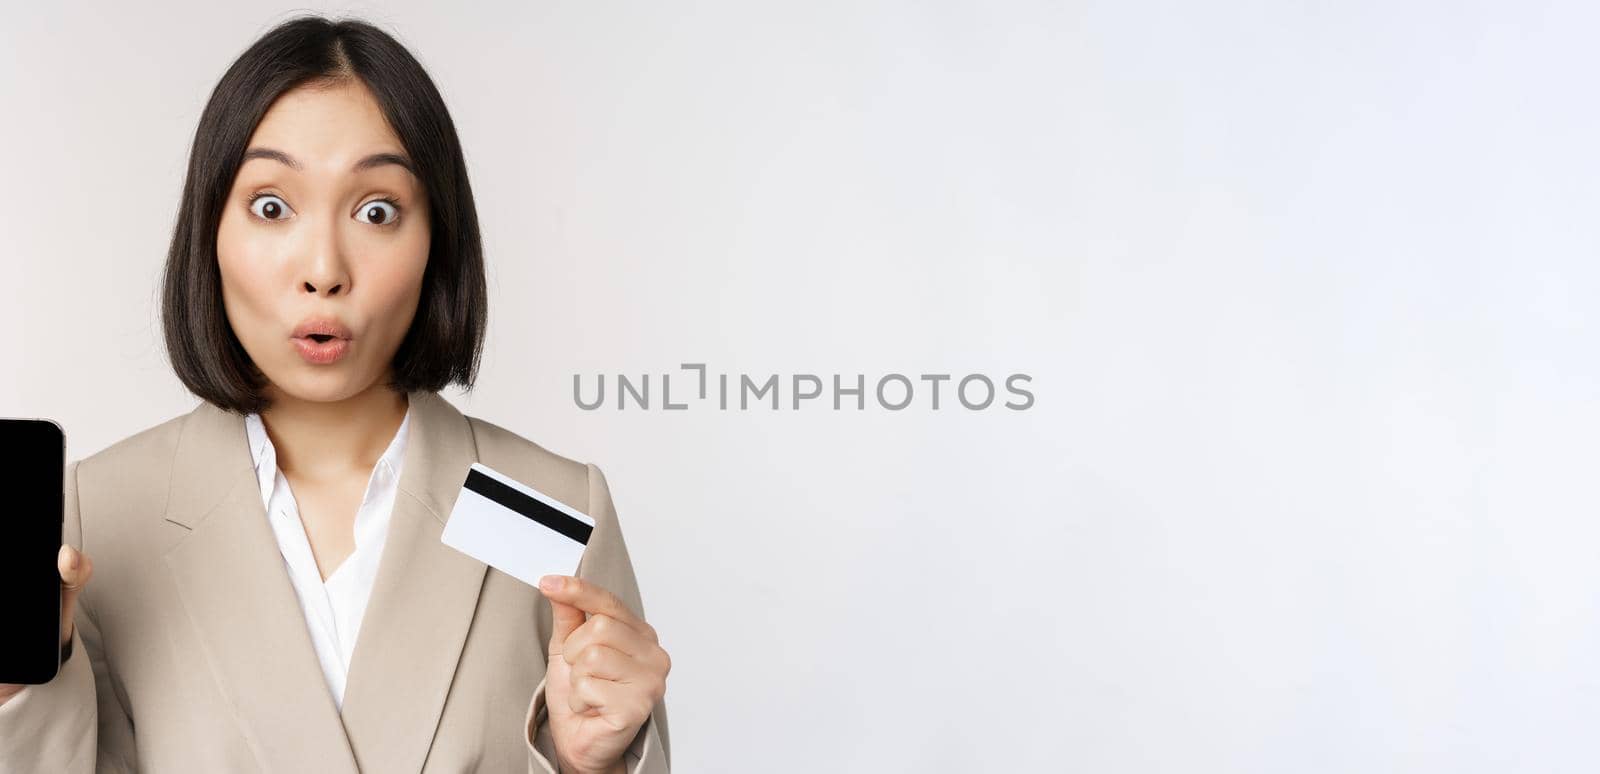 Corporate woman with happy, enthusiastic face, showing credit card and smartphone app screen, standing in suit over white background.